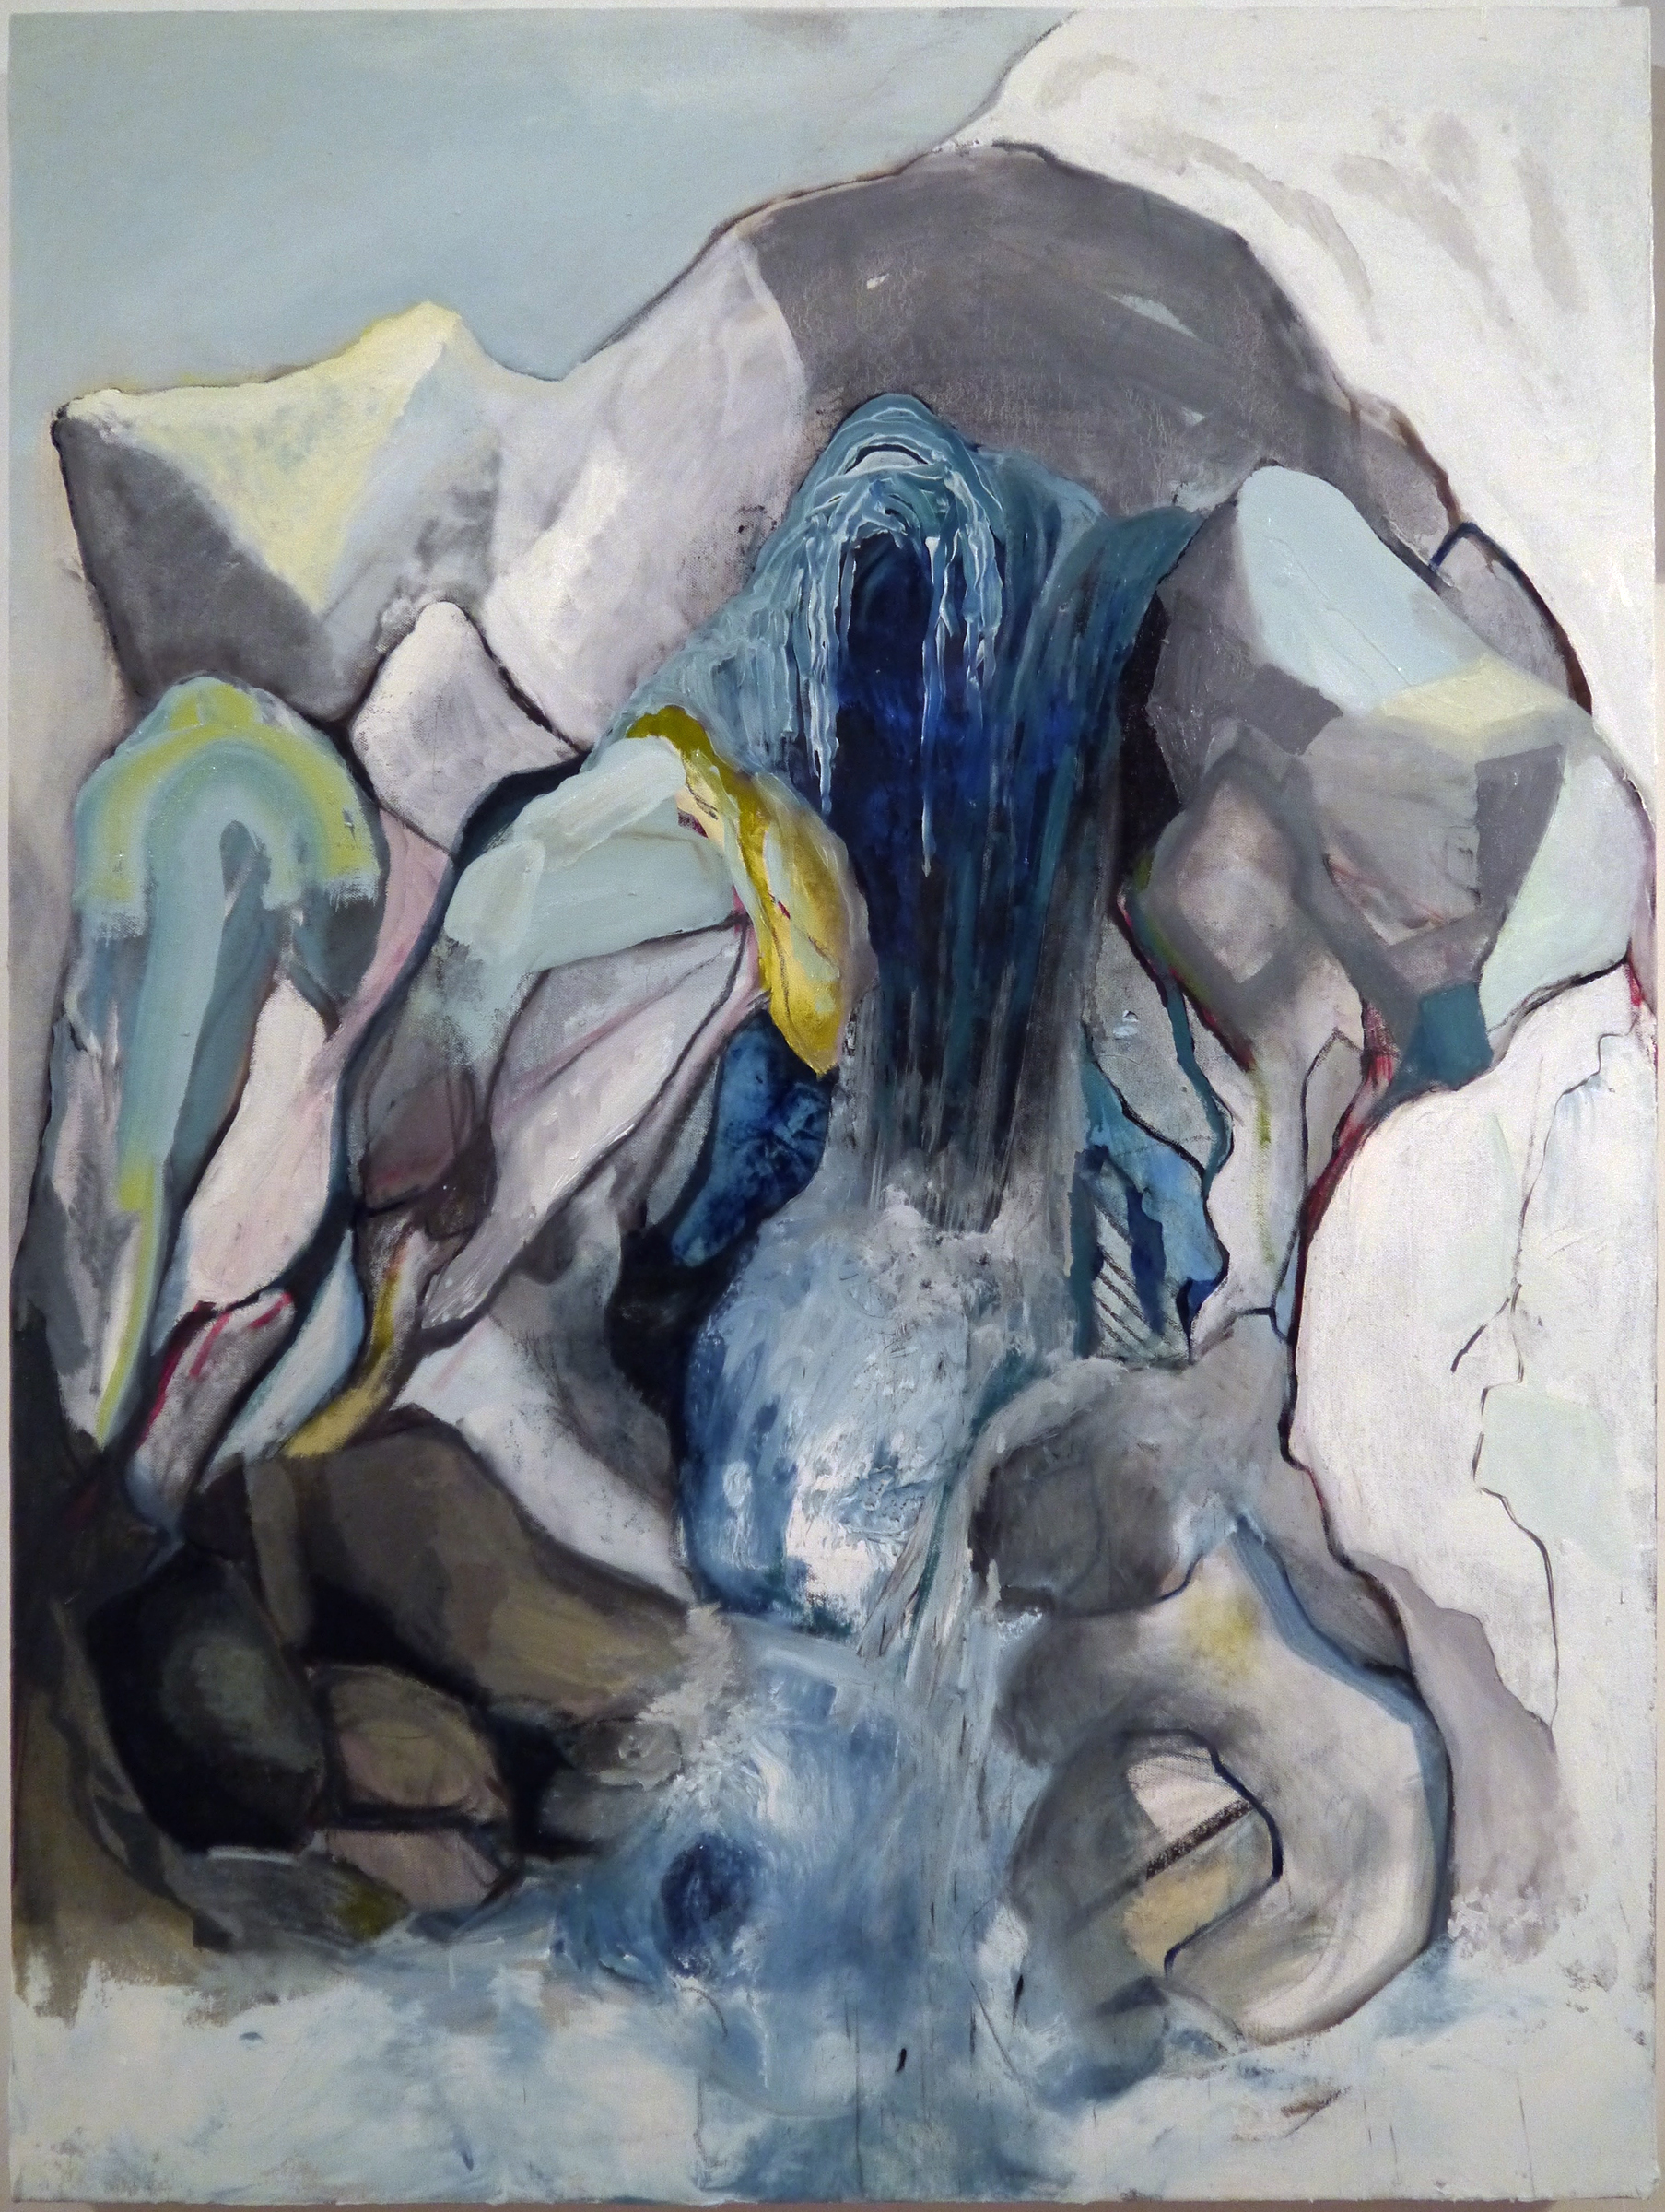  Kathline Carr,  Climbing the Fracture Zone , Oil and graphite on canvas, 40x30 